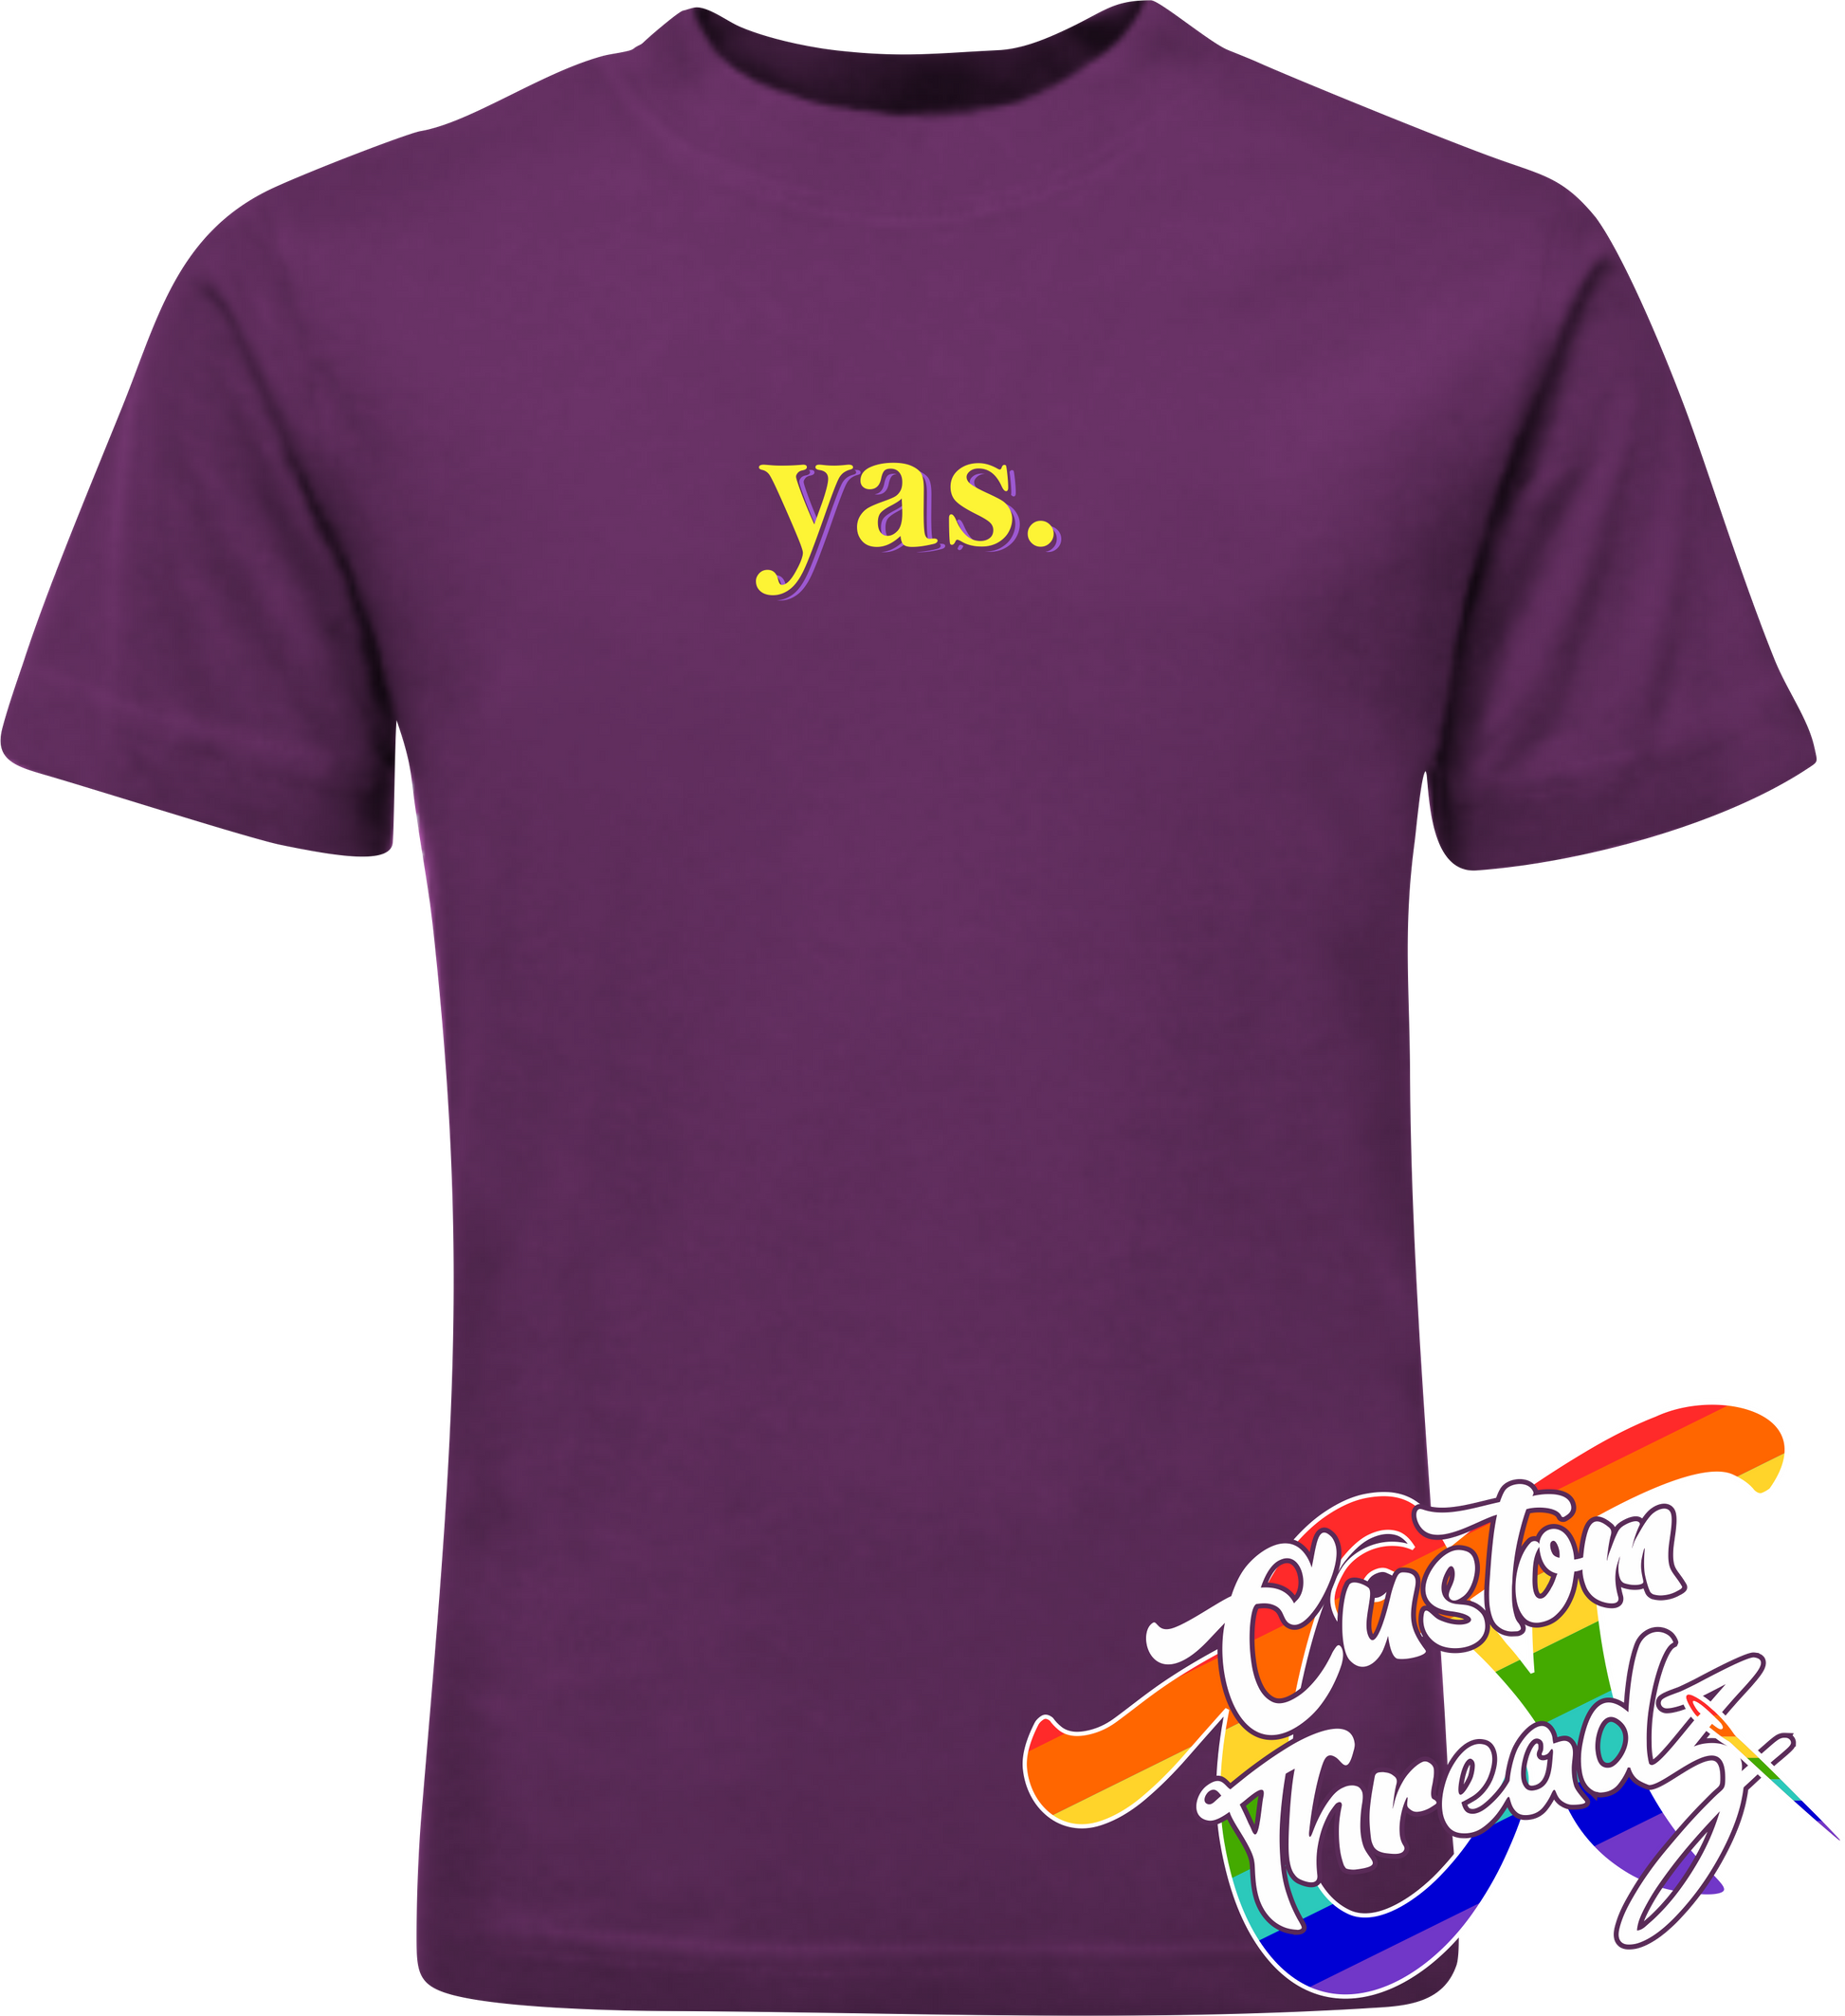 purple tee with yas DTG printed design